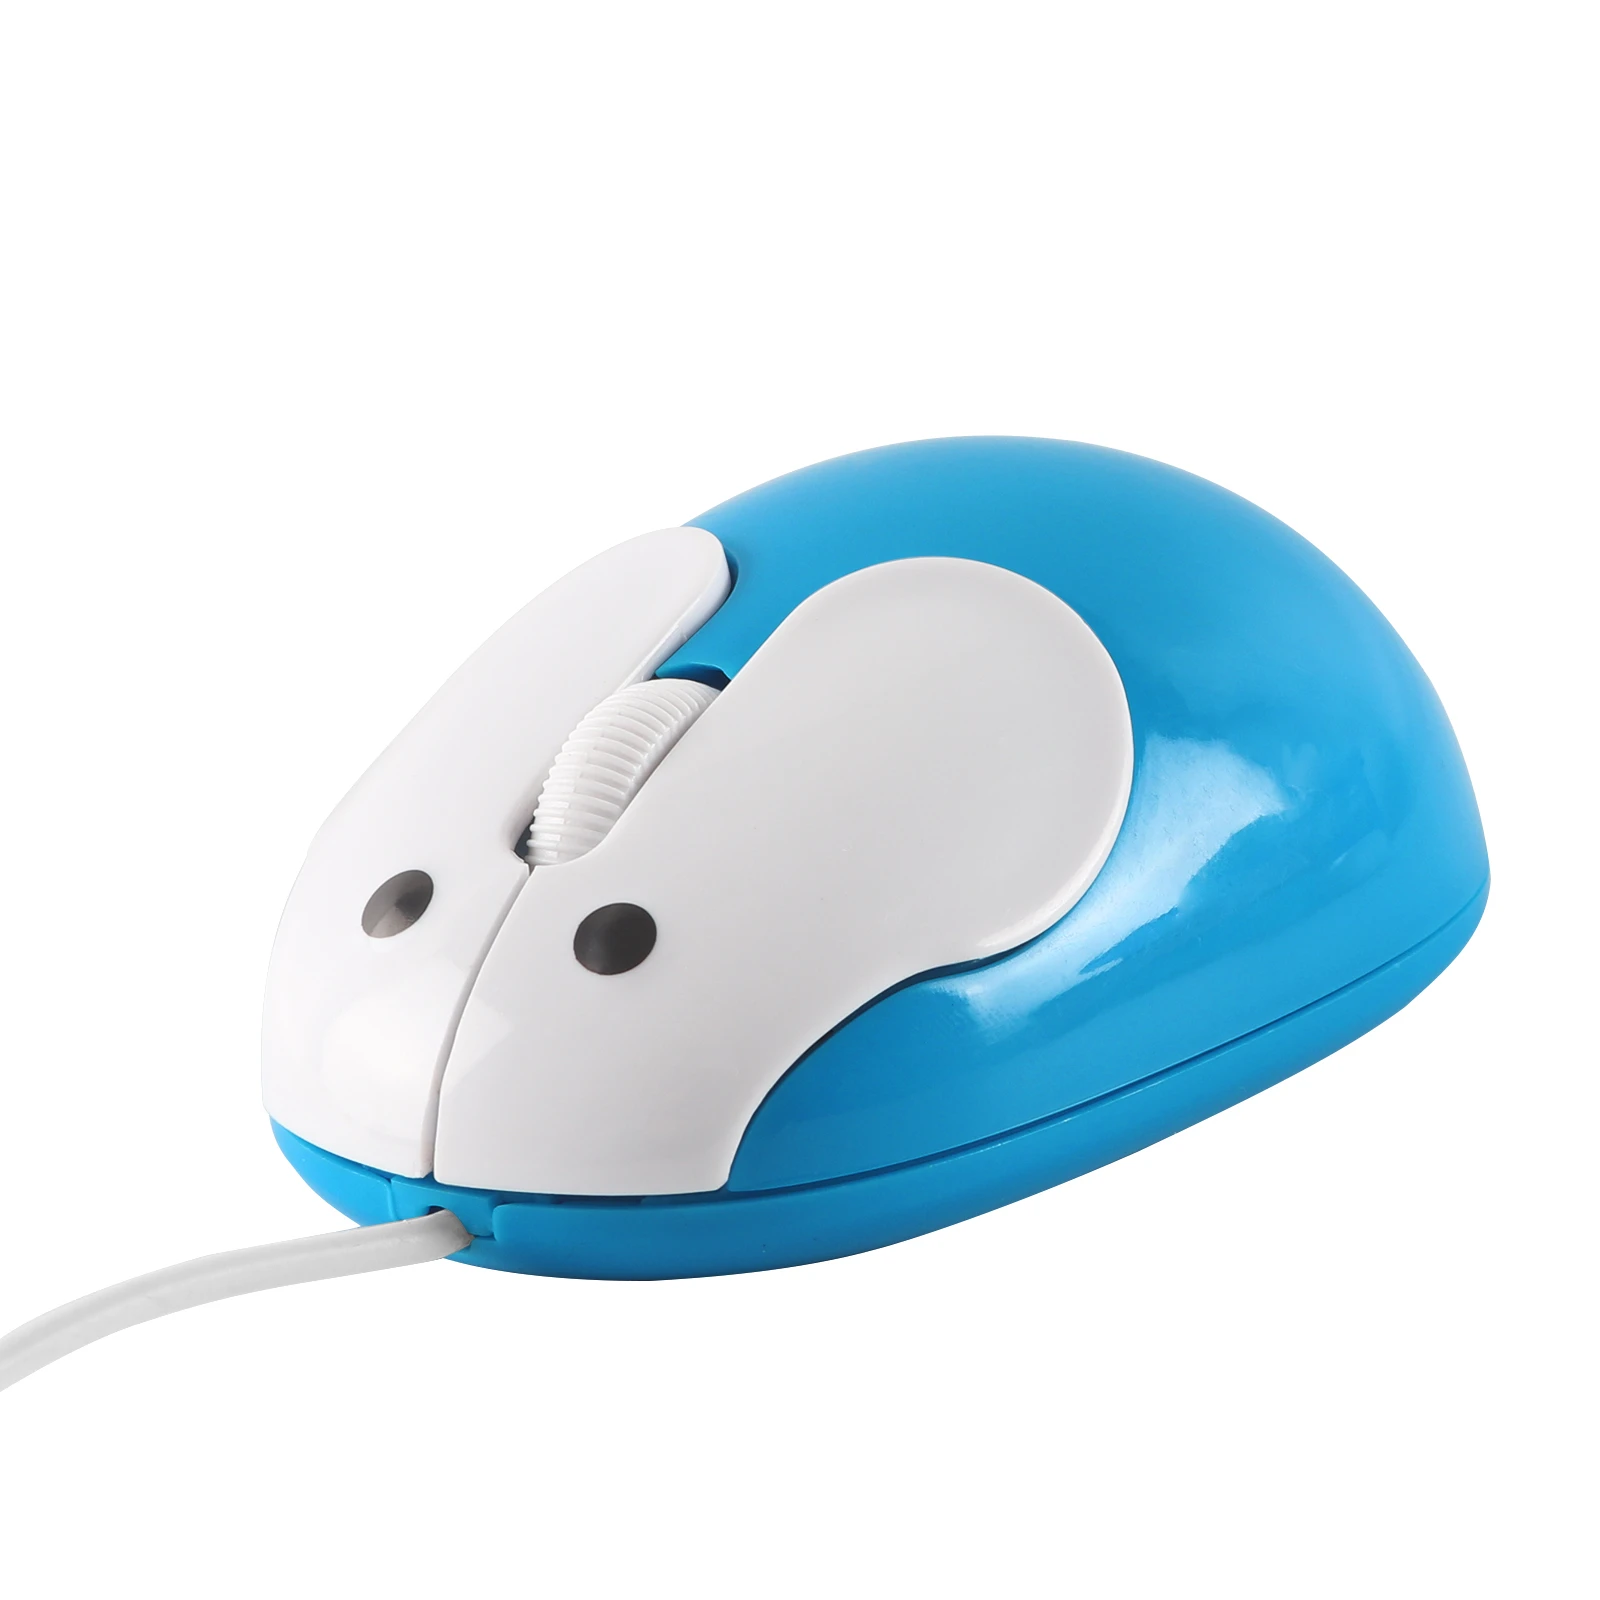 USB Wired Gaming Mouse Cute Cartoon Optical Mouse 3D Mini Rabbit Shape  Computer Mause 1600DPI Ergonomic Gamer Mice For Laptop|Mice| - AliExpress